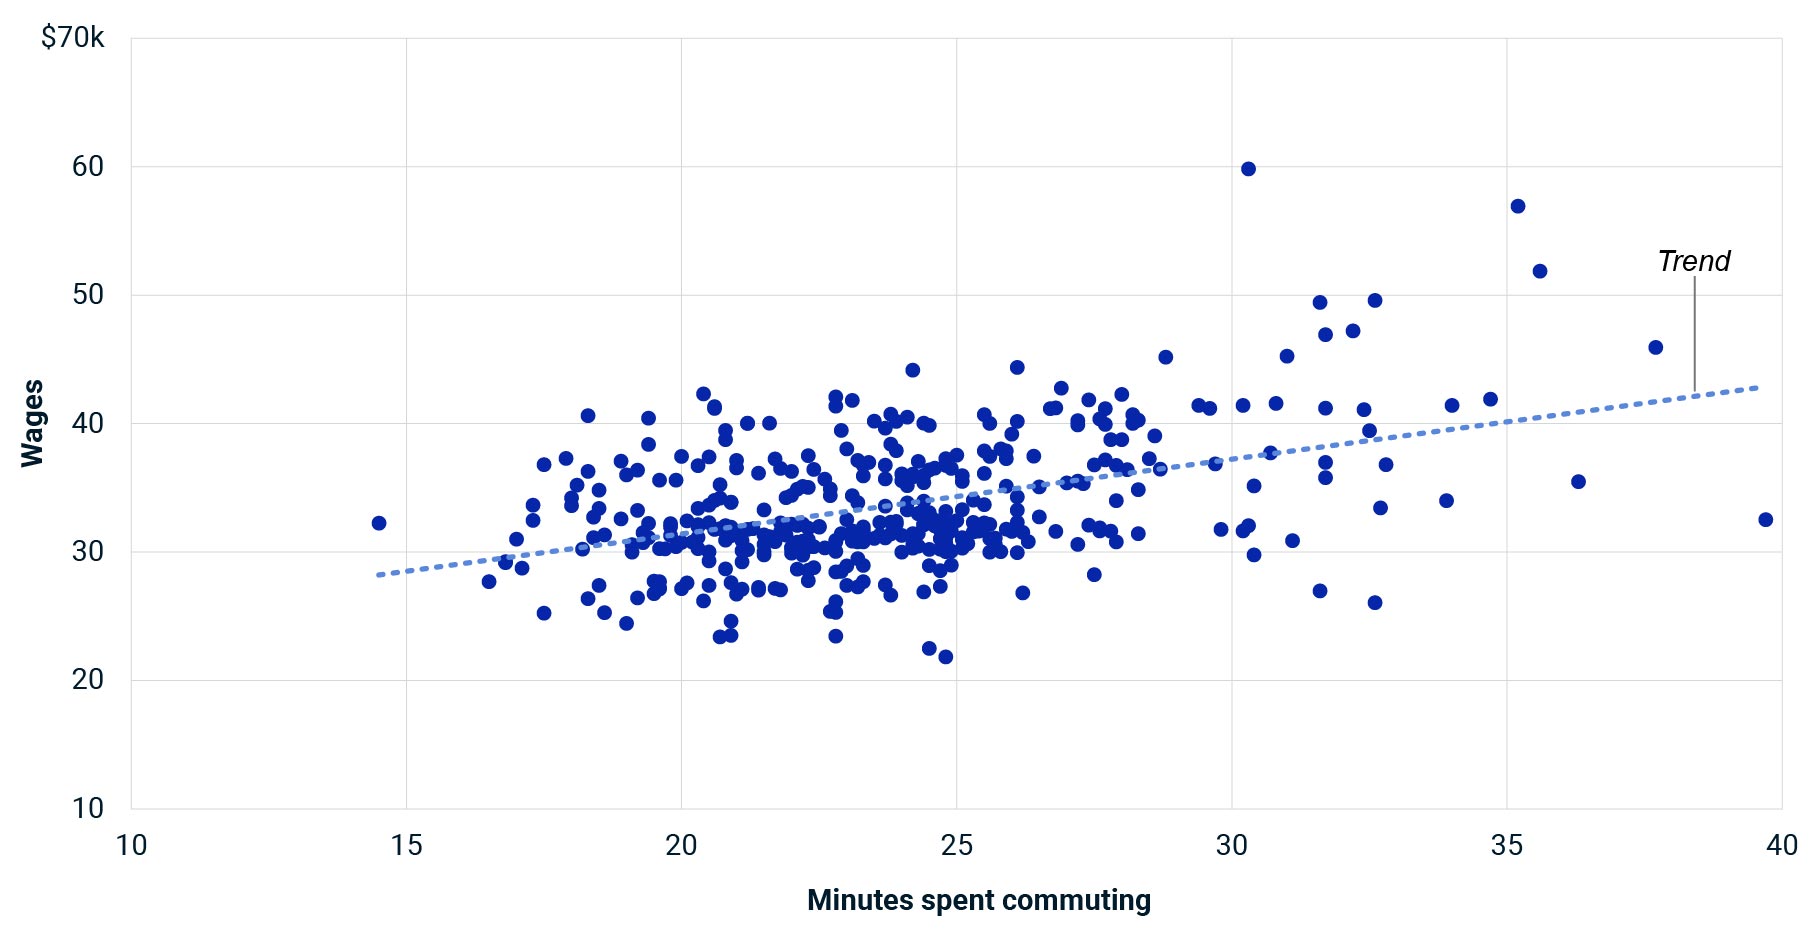 This scatterplot shows the relationship between average commute times and average wages for U.S. metros in 2019. 